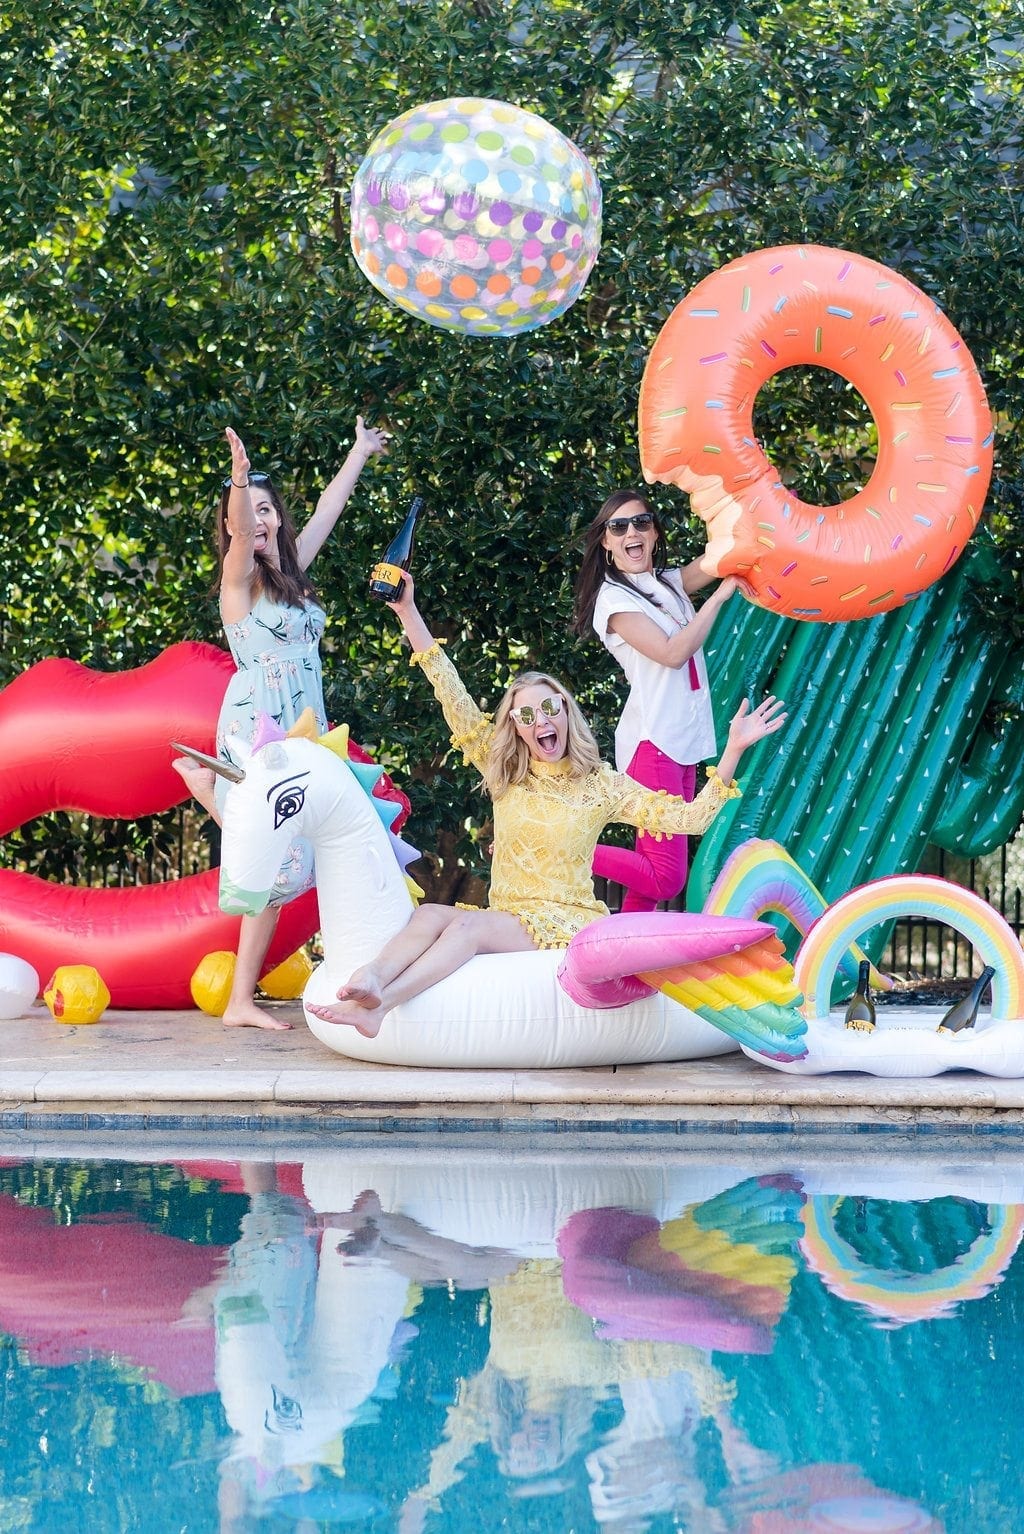 Oversized pool floats 2018. Pool party floats.